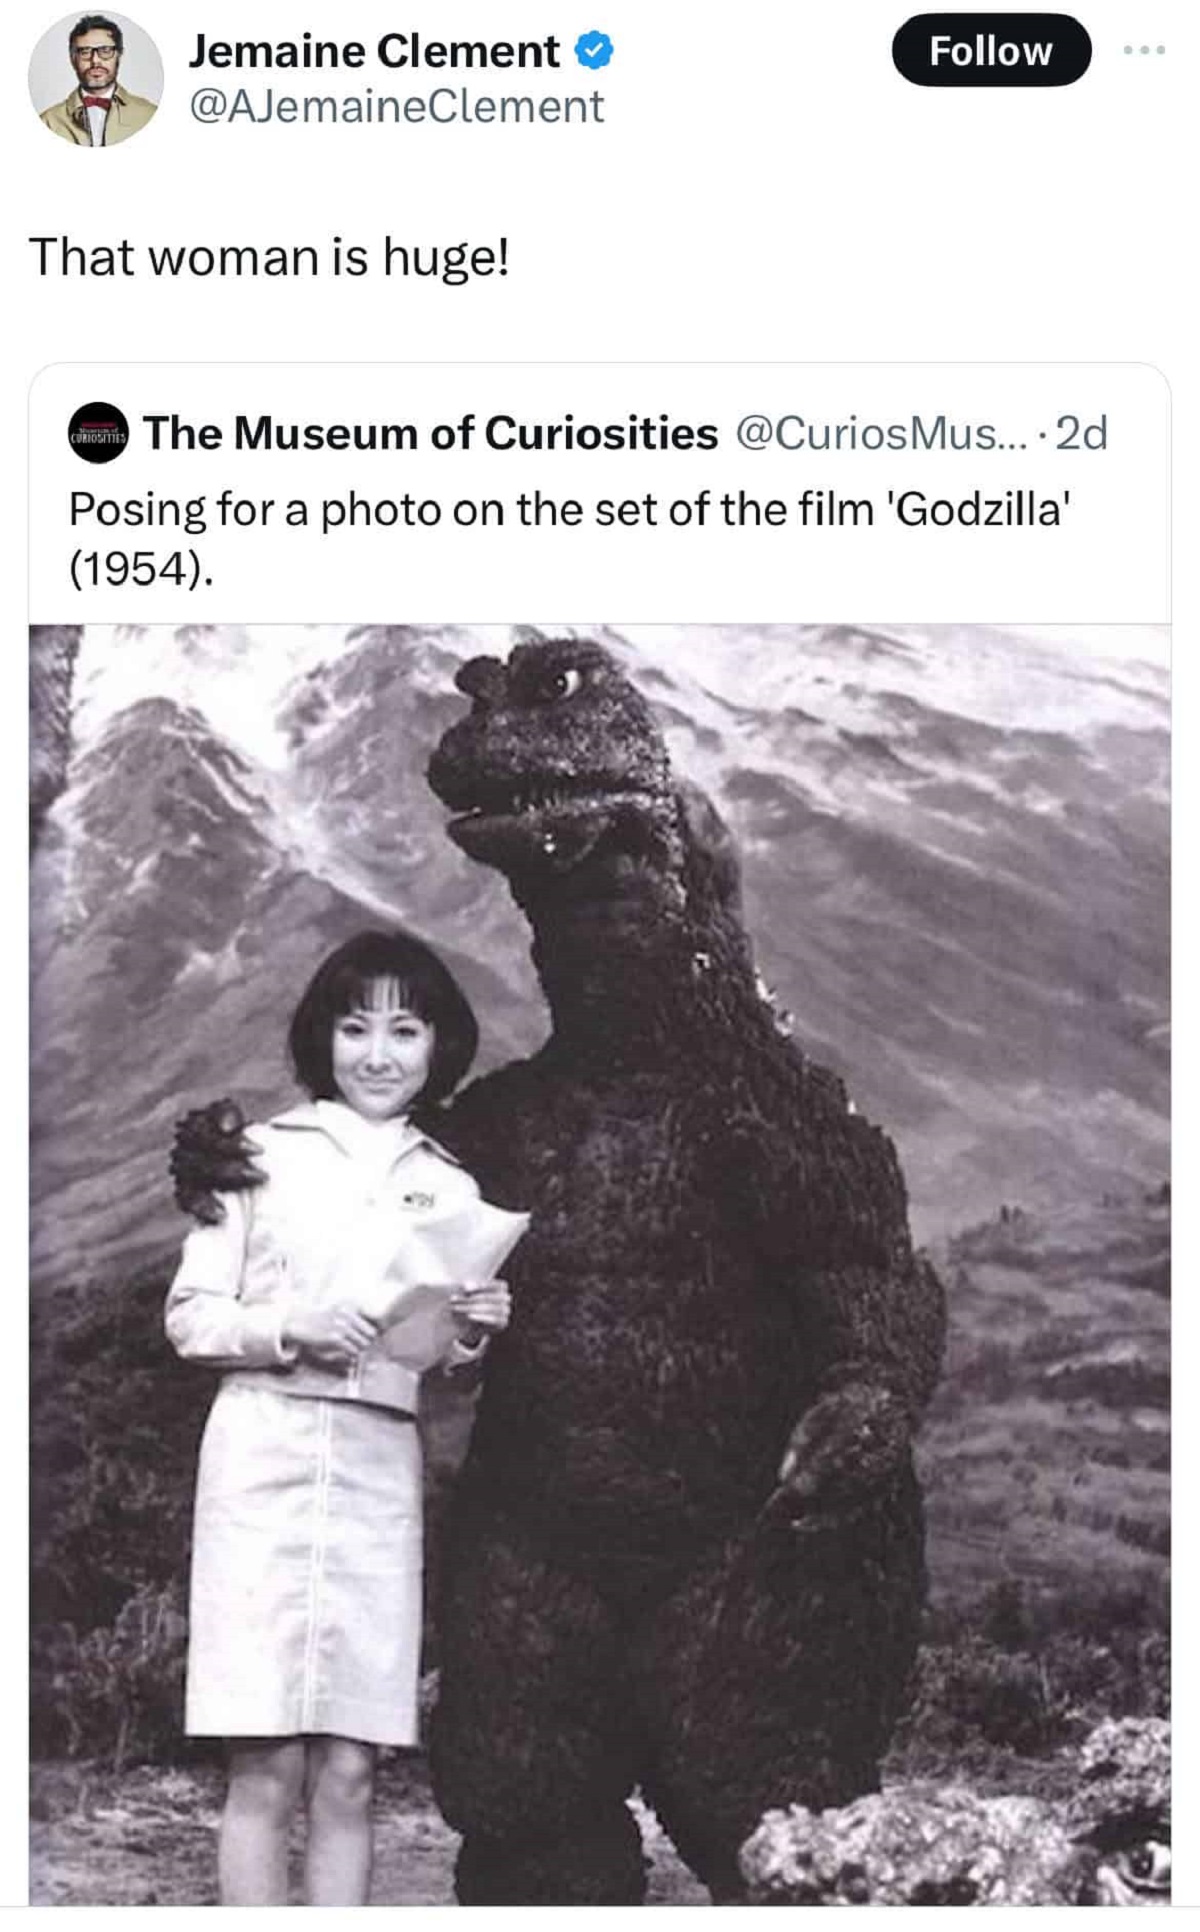 godzilla pick up lines - Jemaine Clement Clement That woman is huge! The Museum of Curiosities Mus.... 2d Posing for a photo on the set of the film 'Godzilla' 1954.